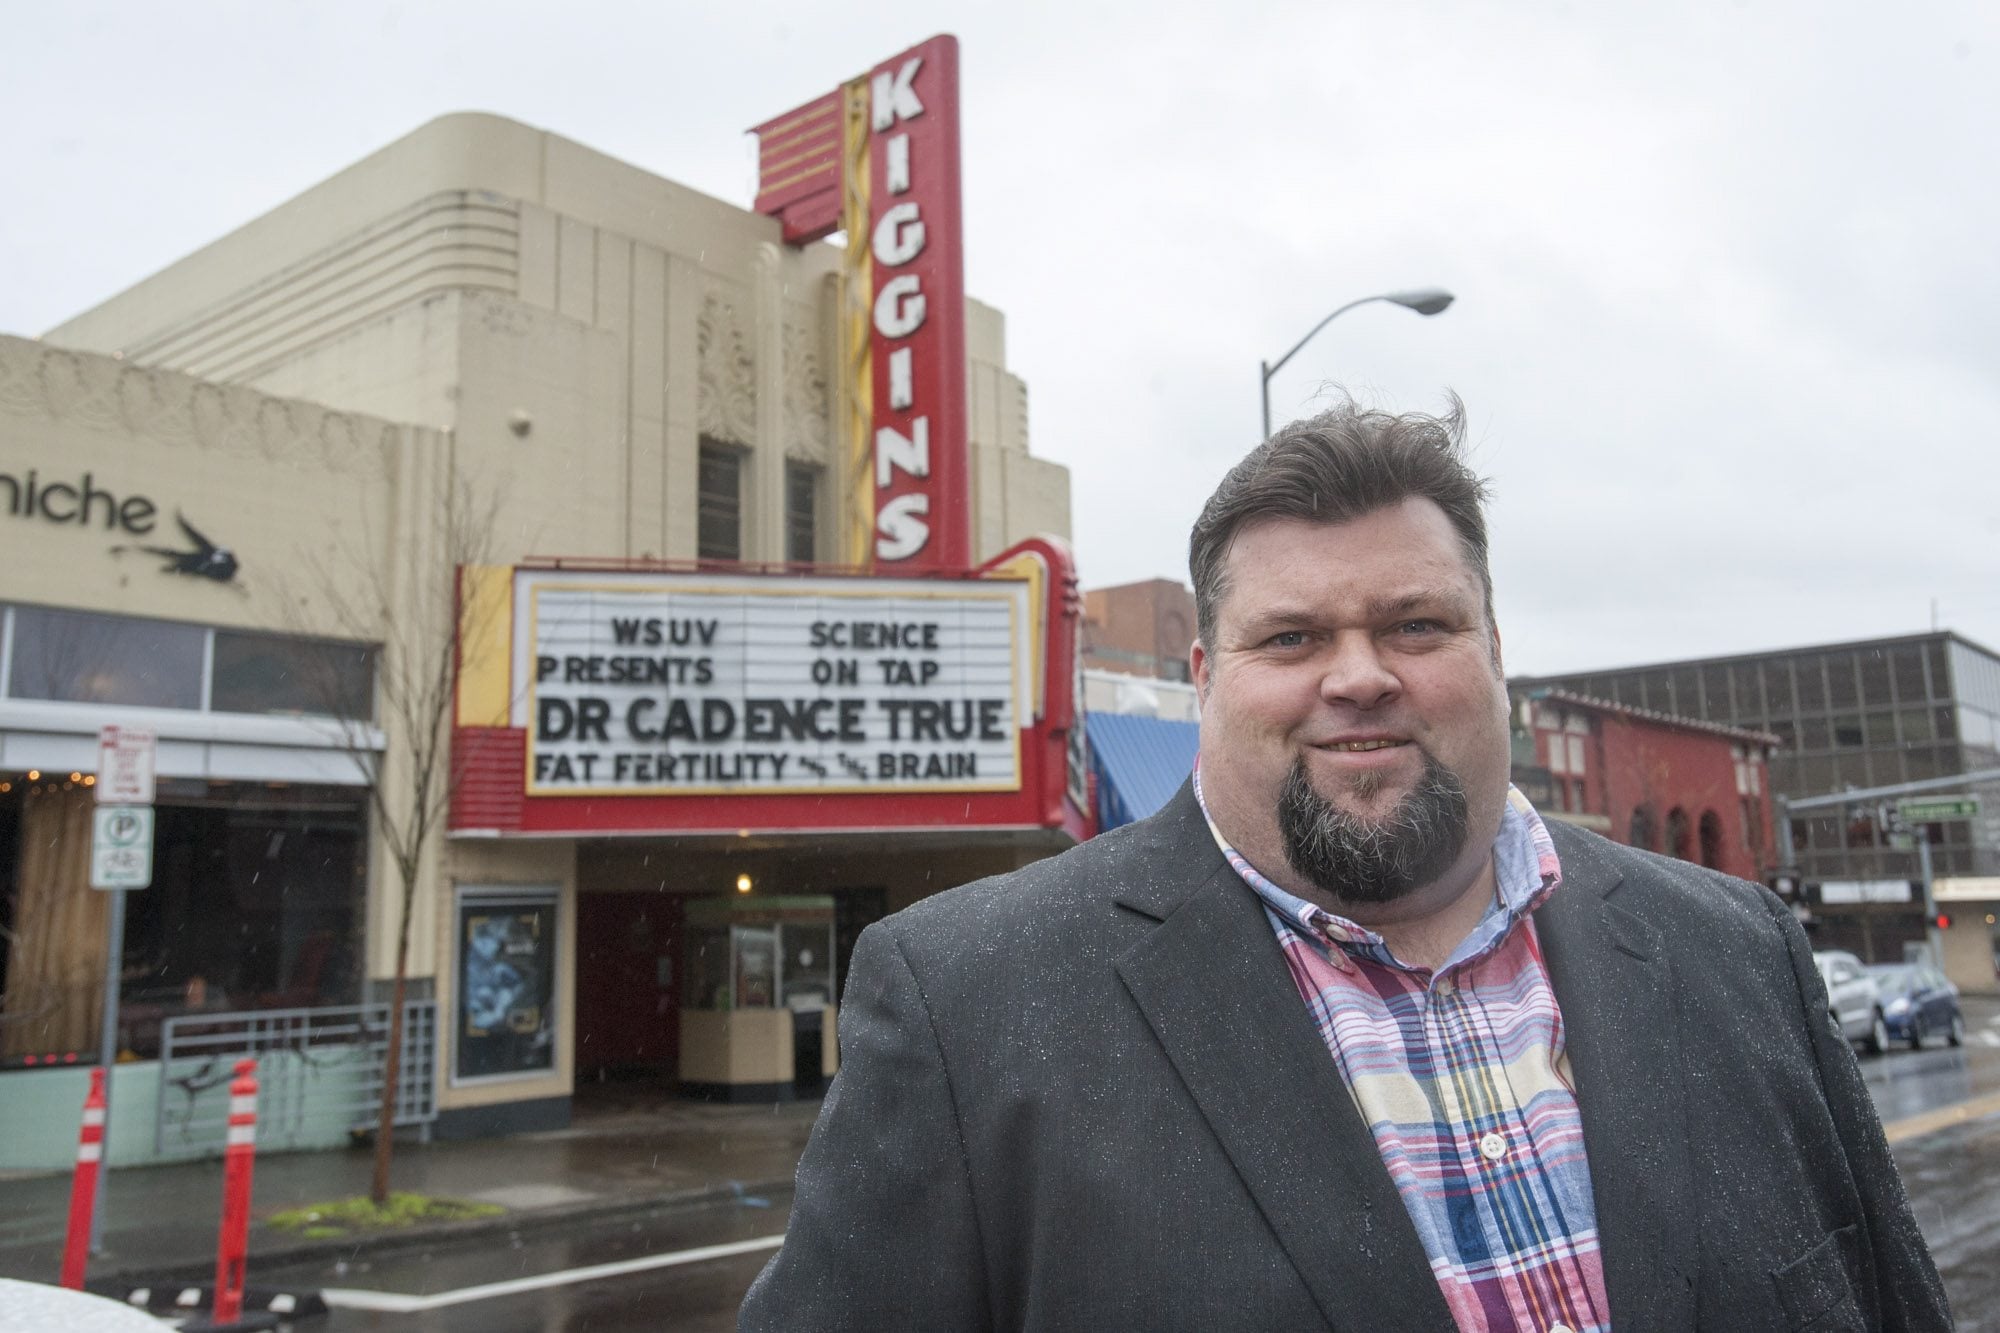 Jeff Waters, founder of the nonprofit Vancouver Filmworks, said he hopes to make Vancouver a center for film production and a laboratory for training in the film industry. Waters is raising money to achieve those goals and produce his first major film. The nonprofit group is hosting a fundraiser on April 9 at Kiggins Theatre in Vancouver.